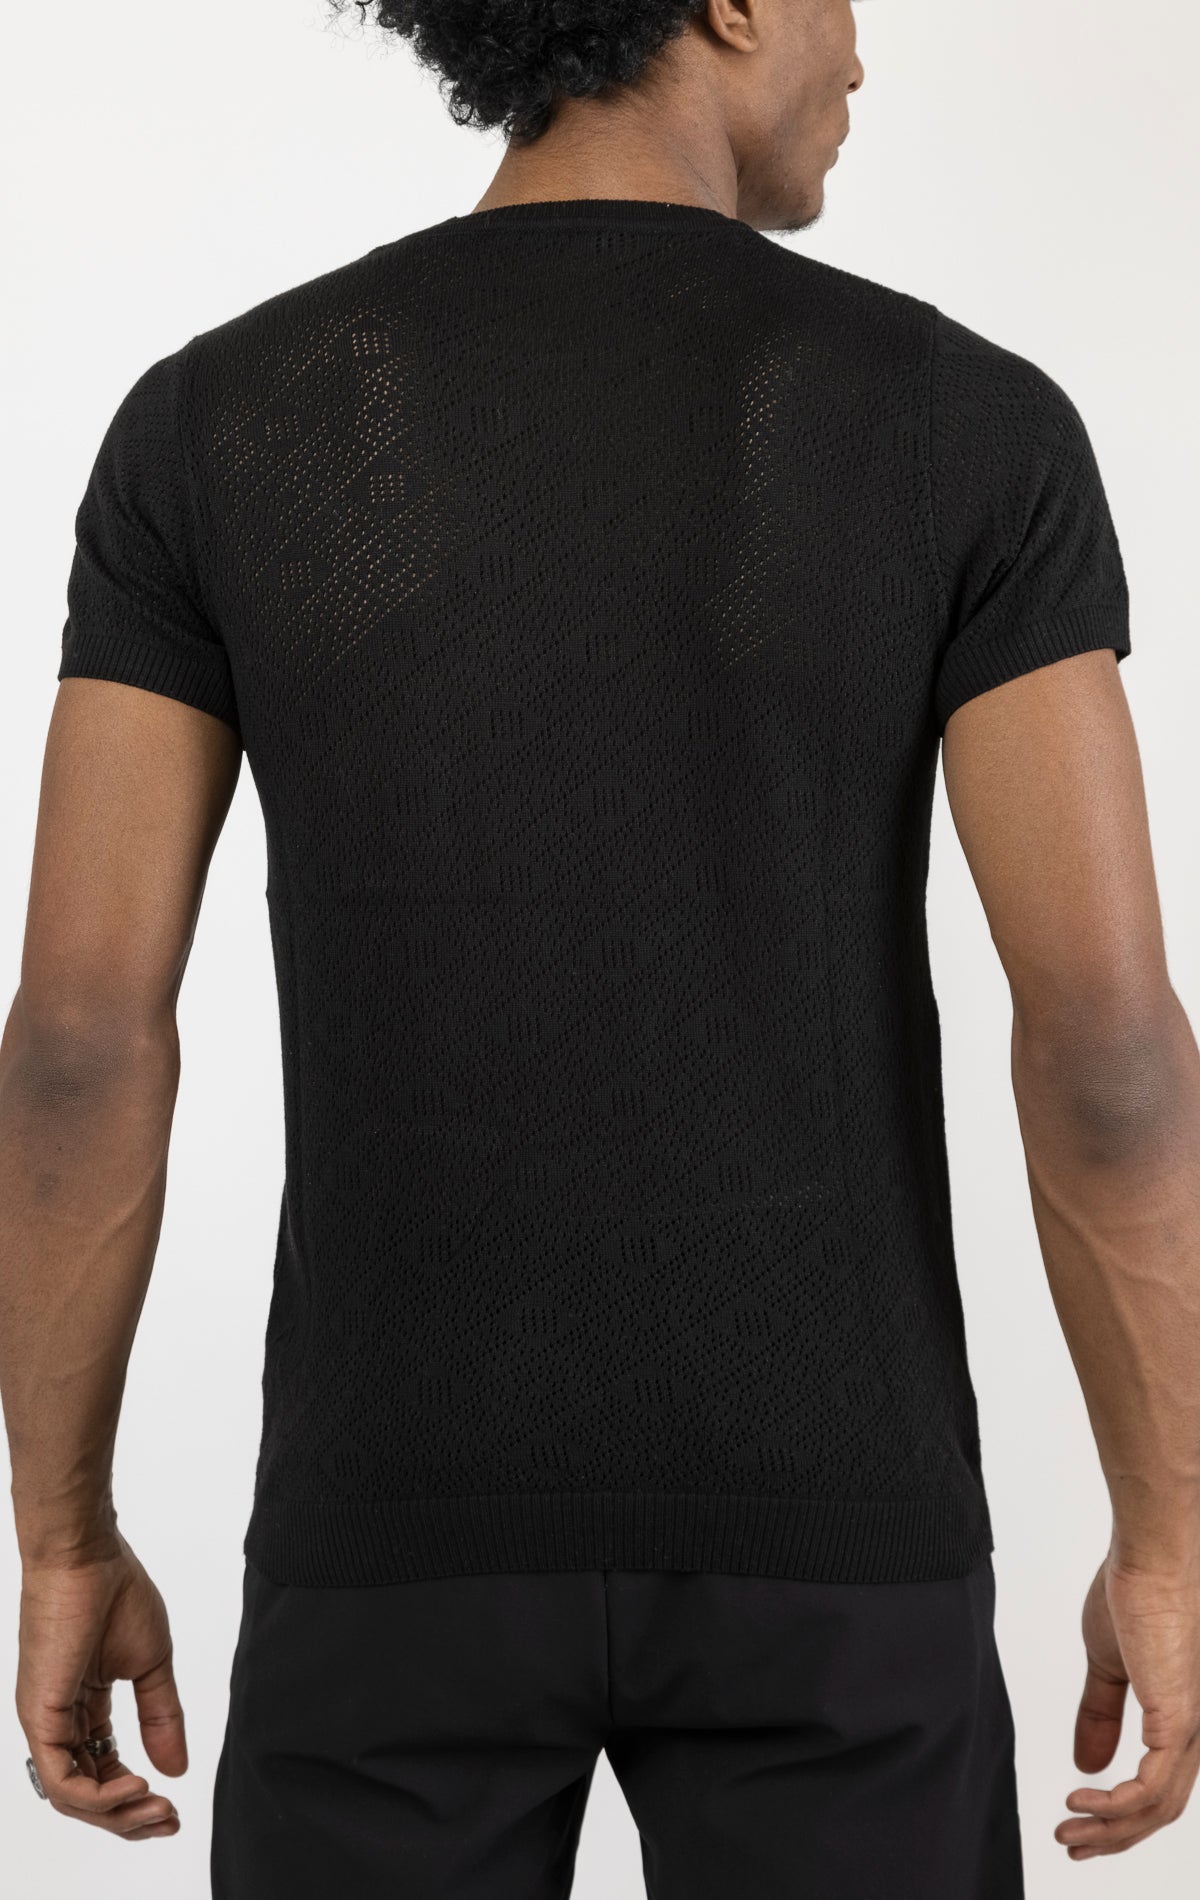 Women's geometric crochet knit top in black. The top is made from a 50% viscose, 50% polyamide blend and features a unique geometric crochet pattern.